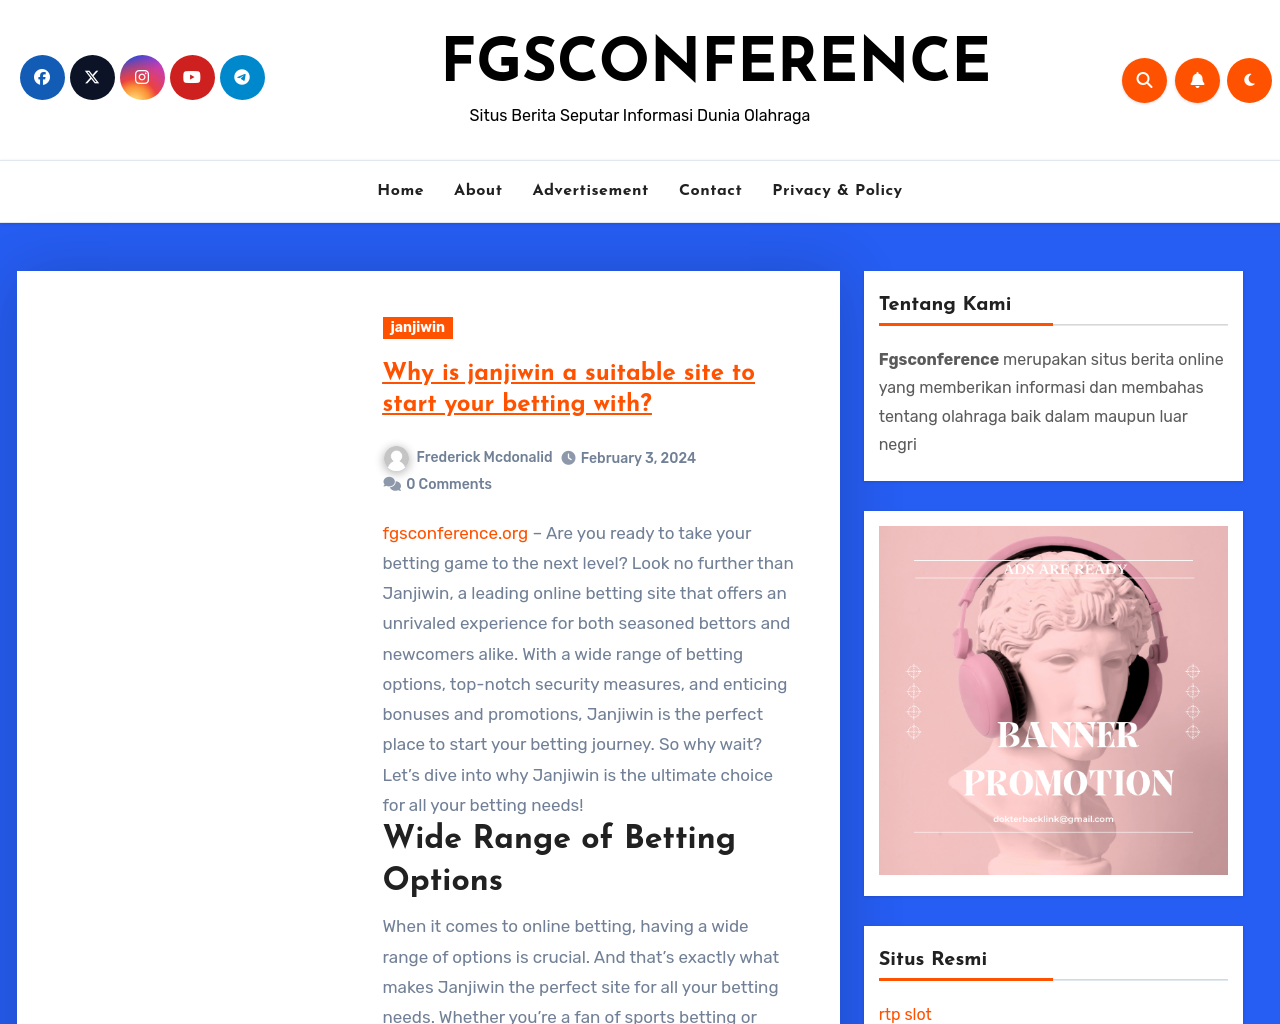 fgsconference.org